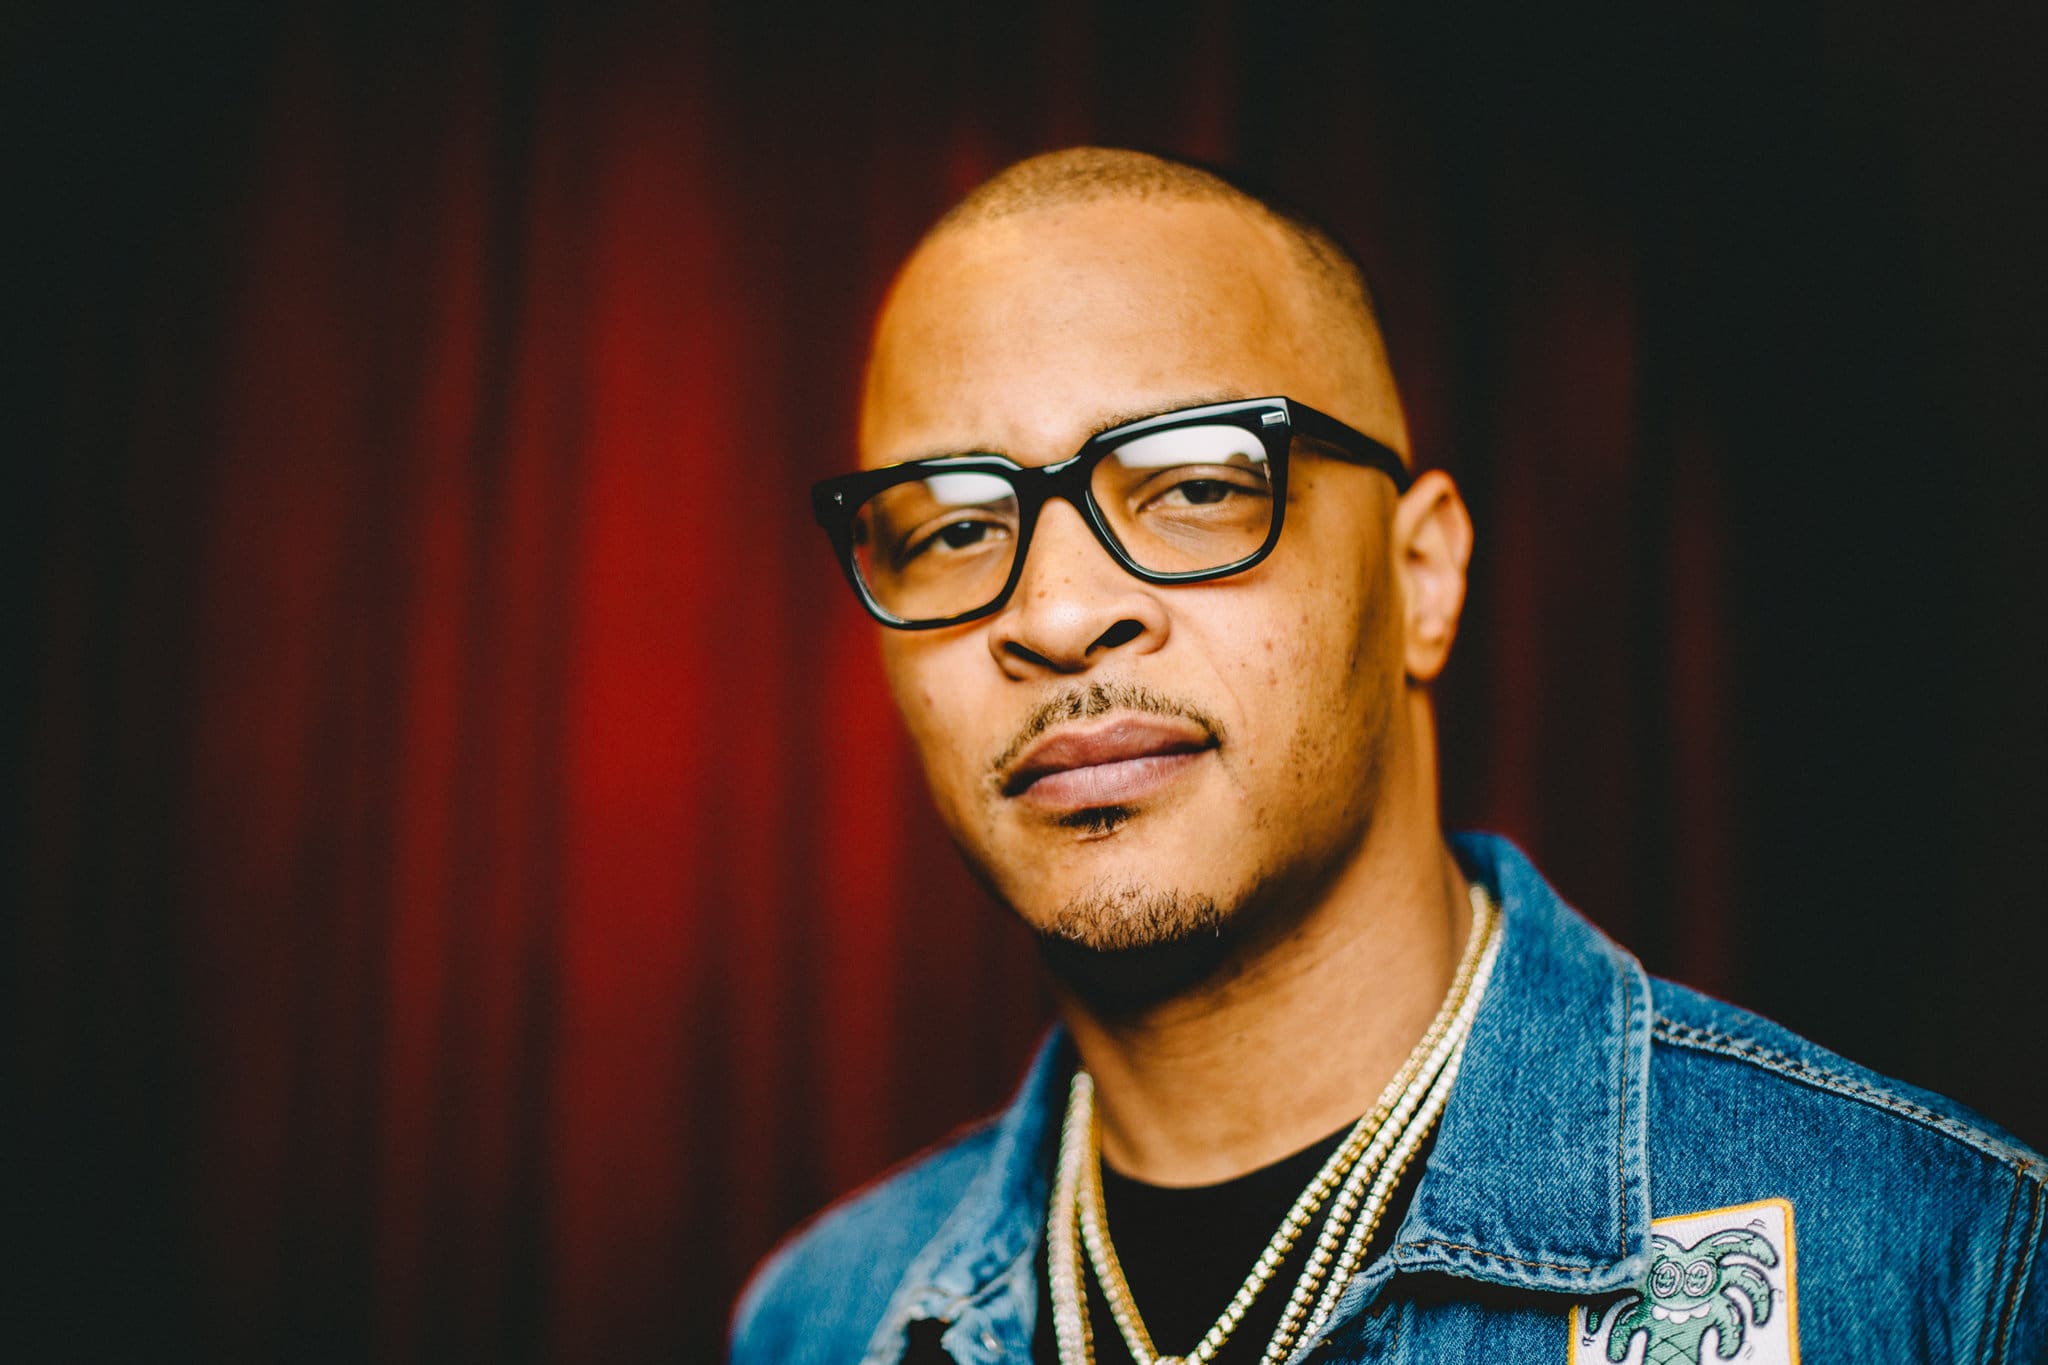 T.I. Praises A Rap Legend - See The Message He Shared